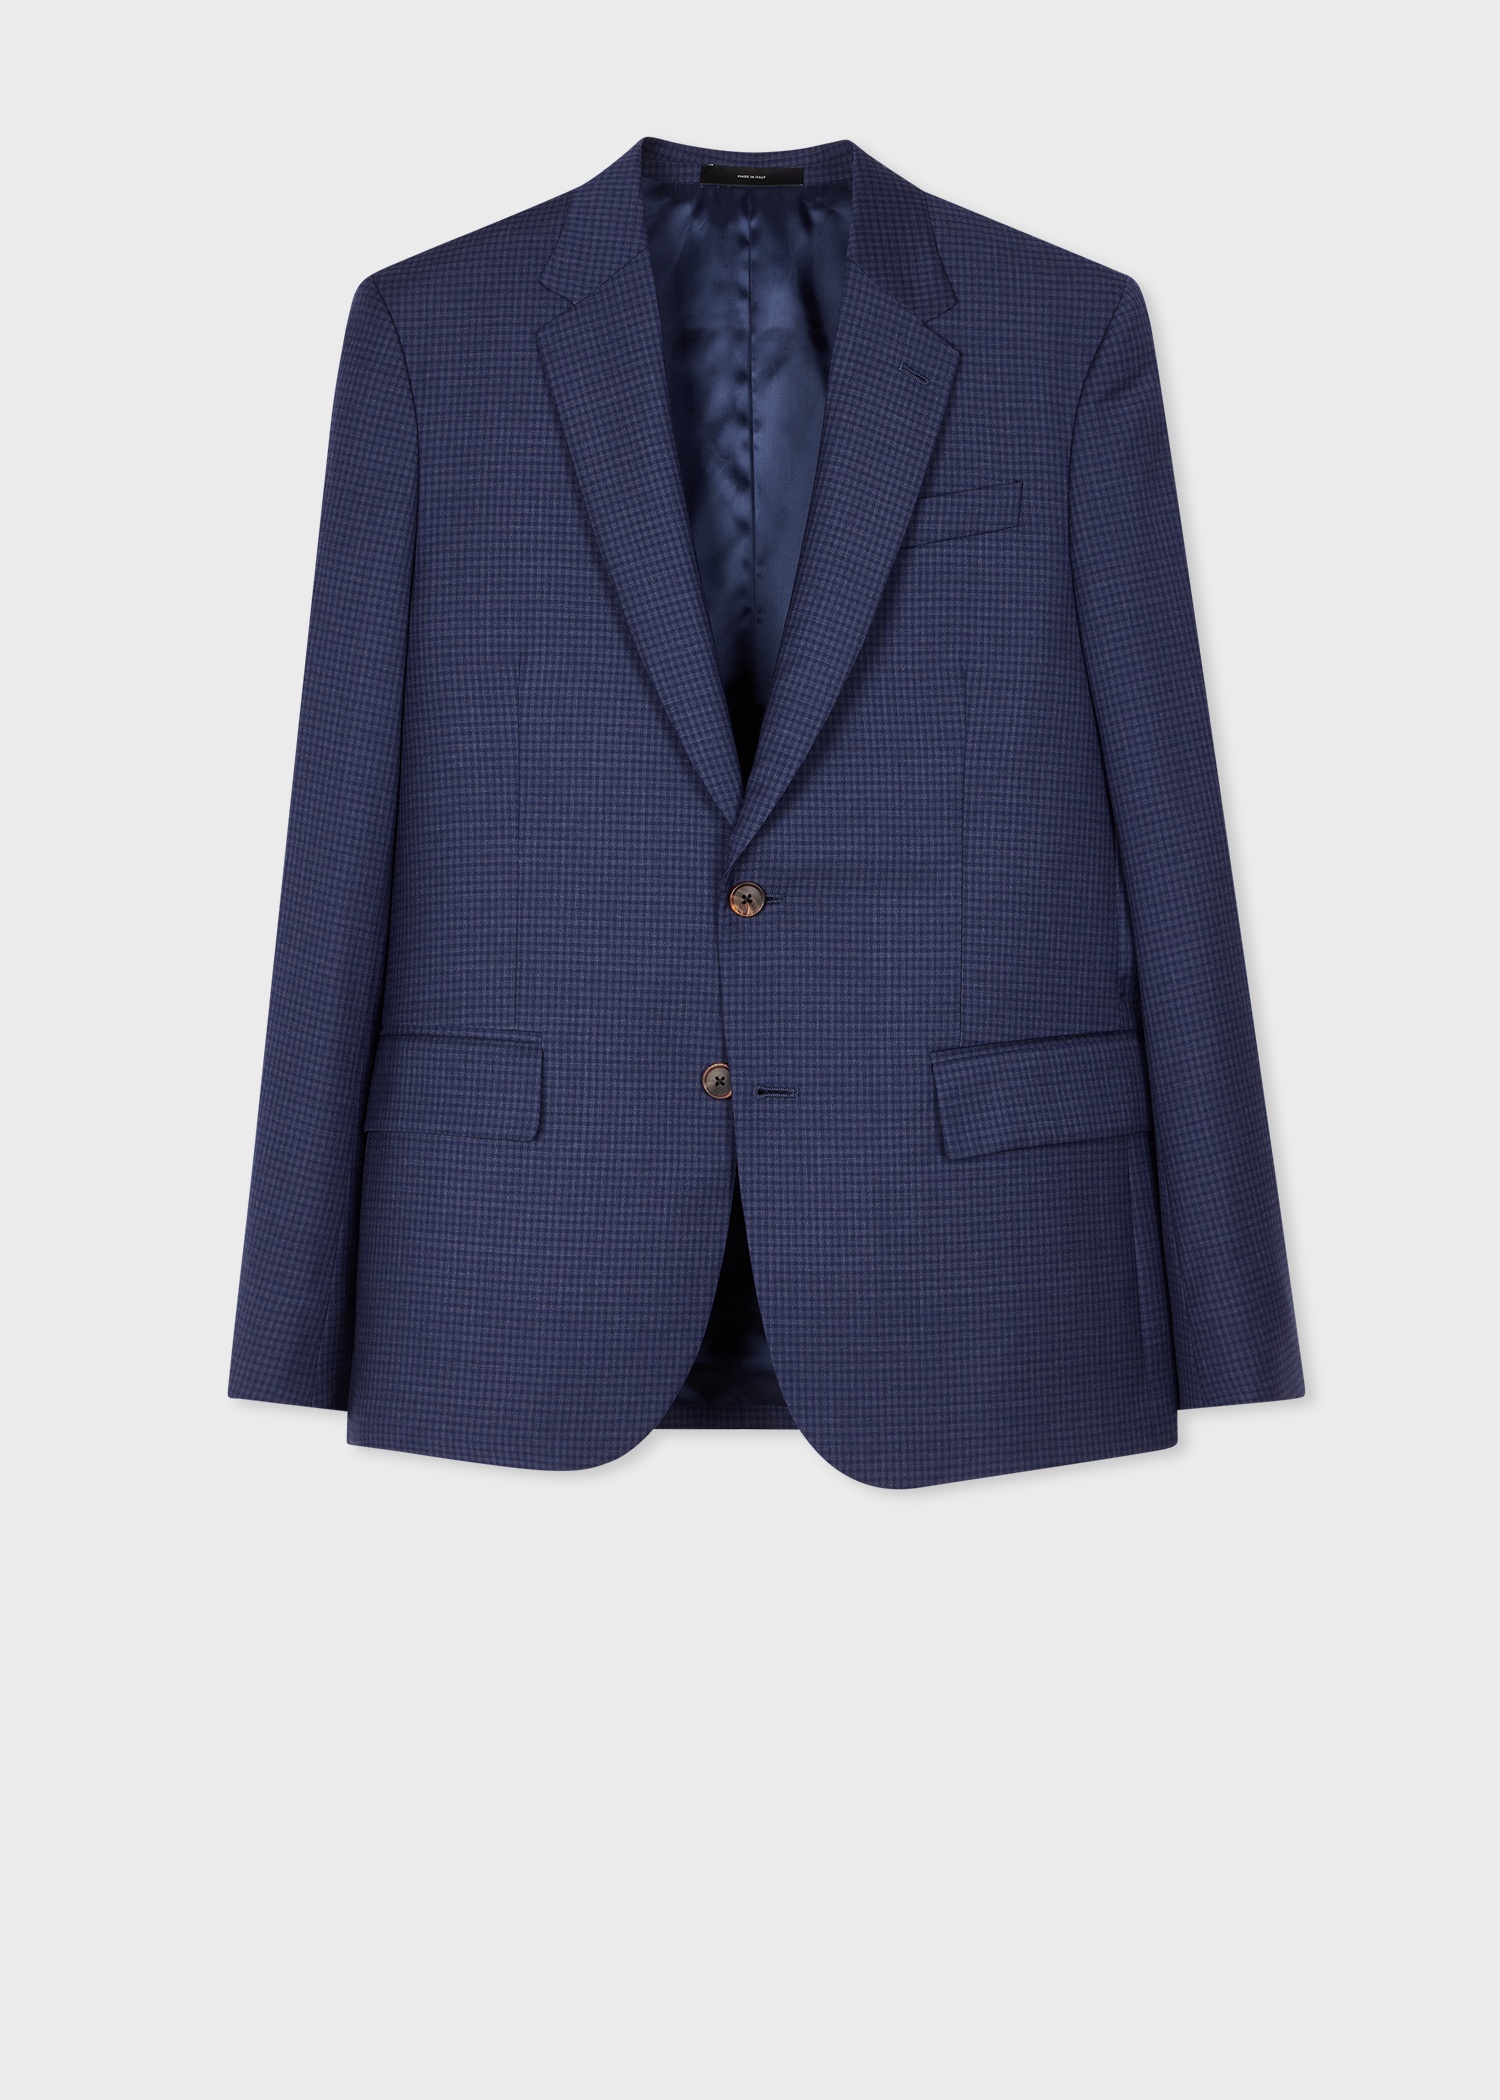 The Soho - Tailored-Fit Blue Gingham Wool Blazer - 1